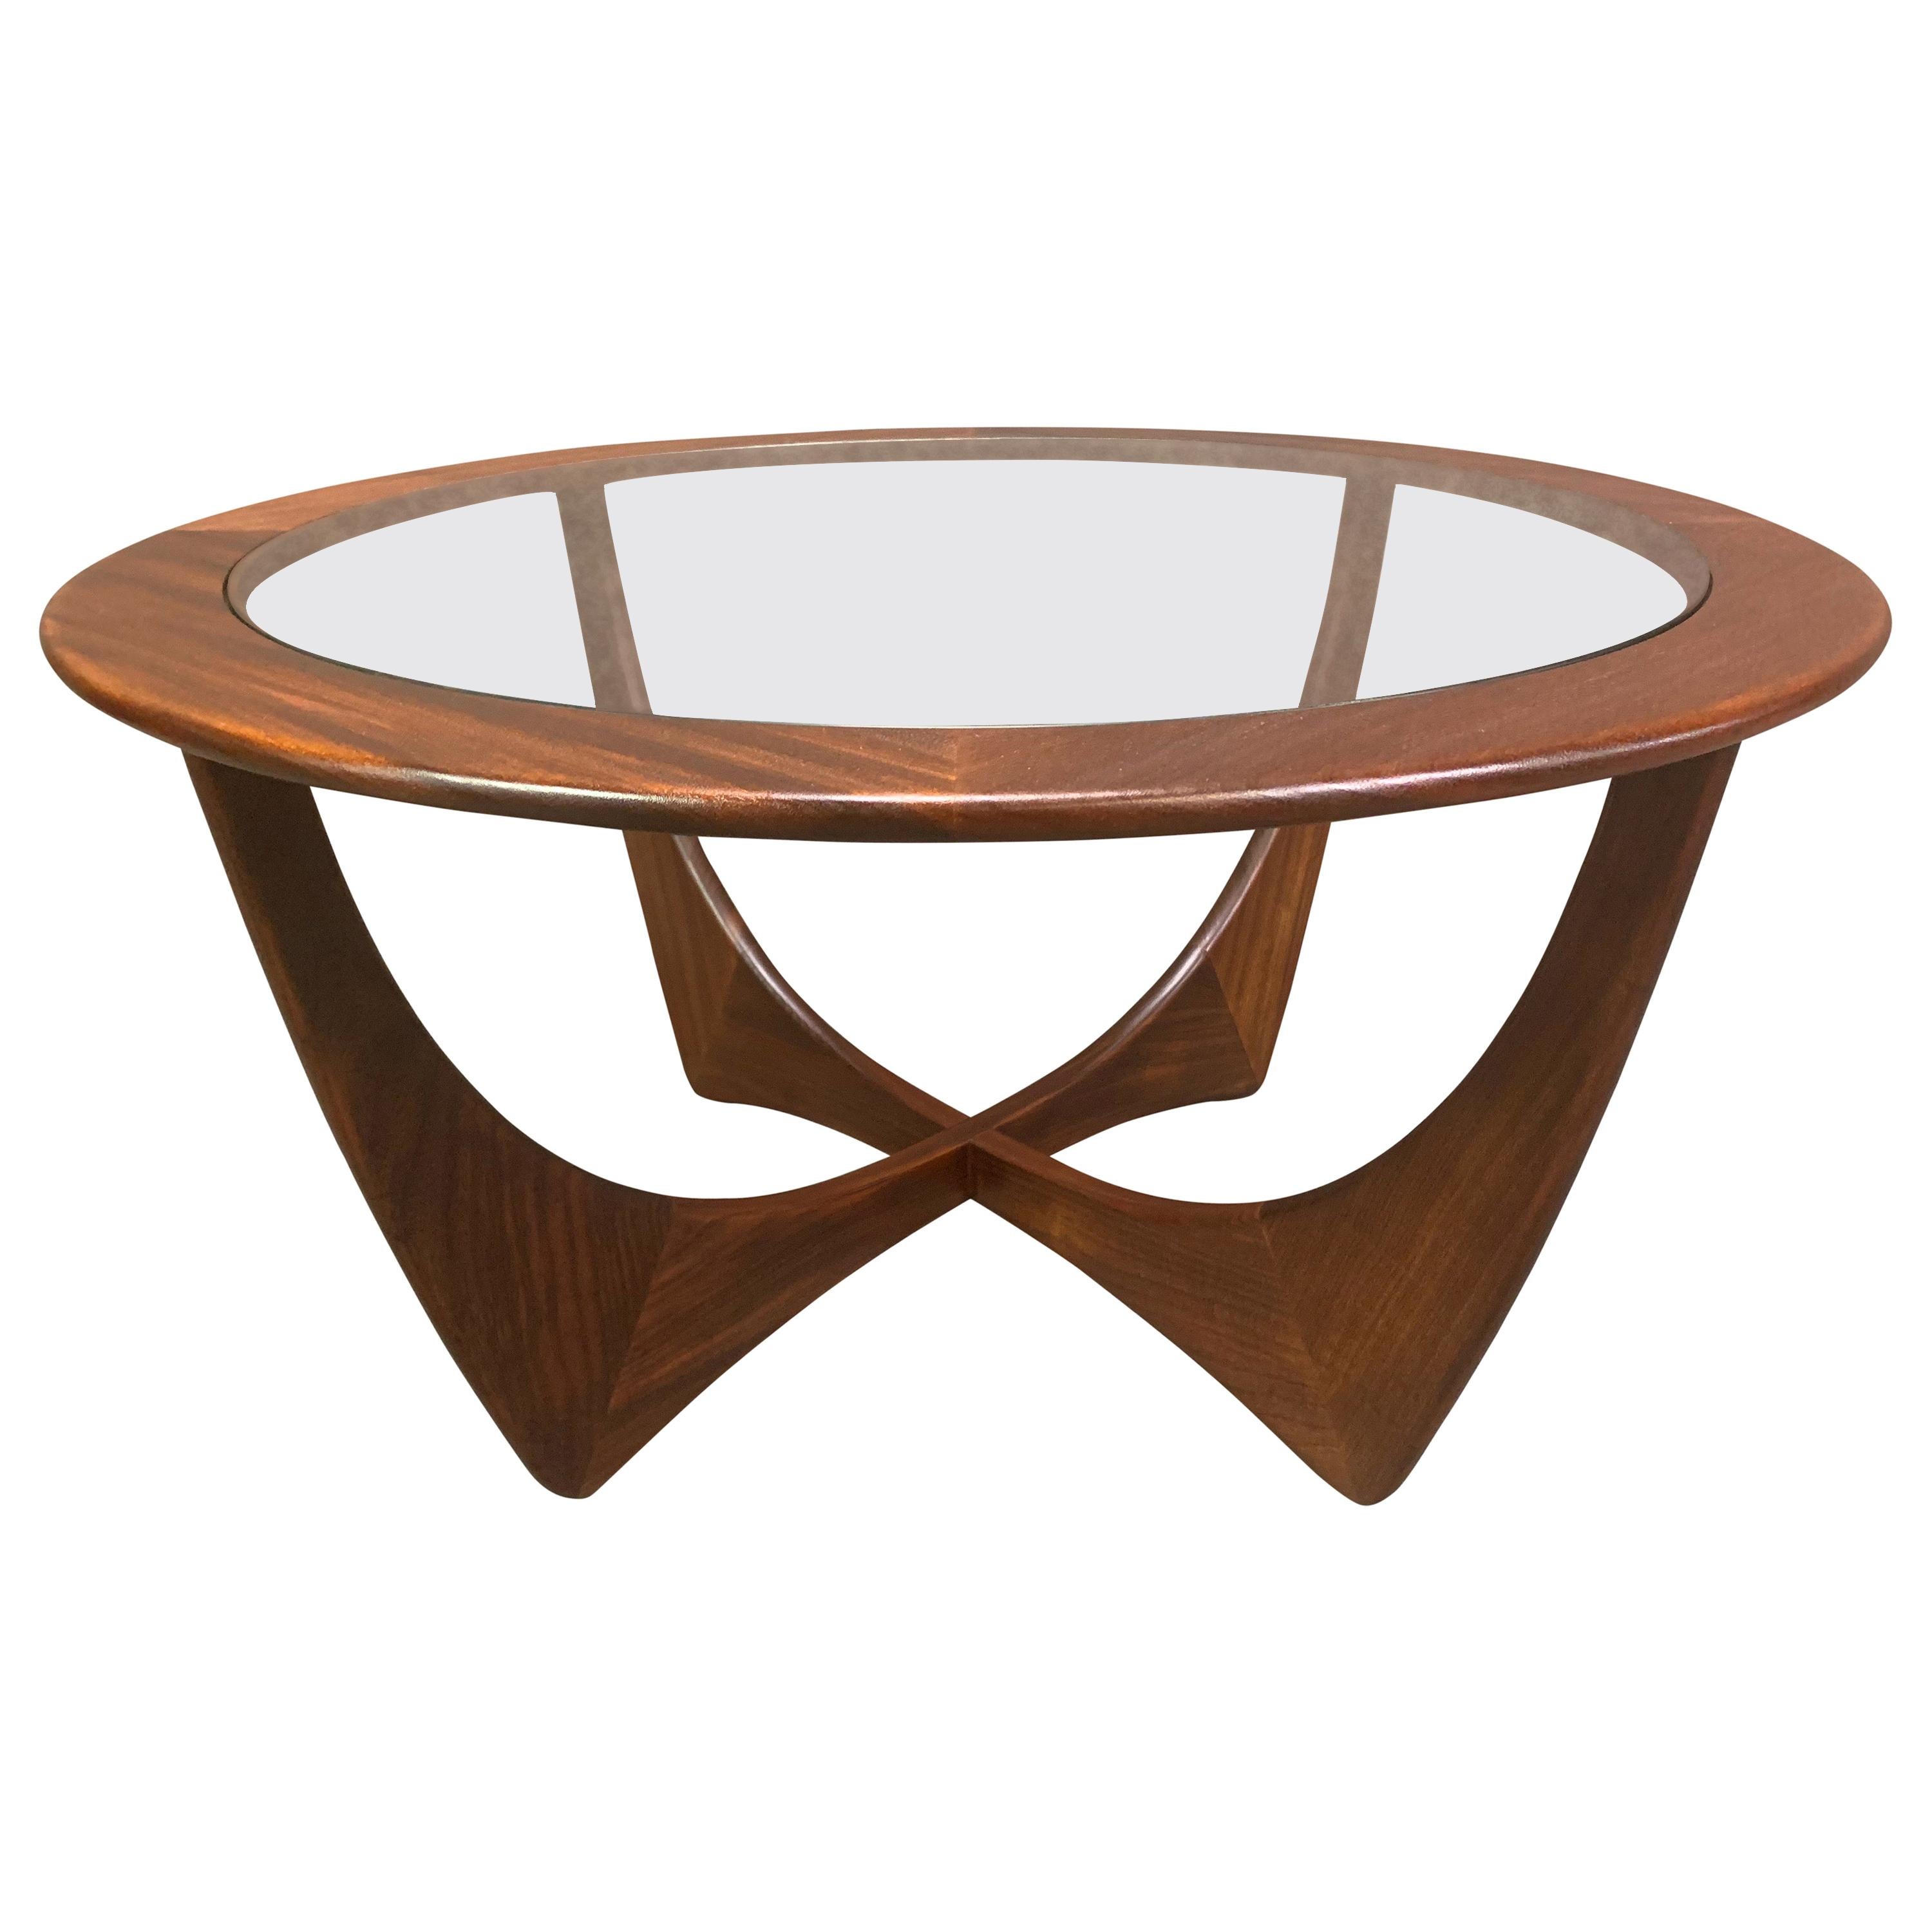 Vintage Mid-Century Modern Teak "Astro" Coffee Table by G Plan For Sale